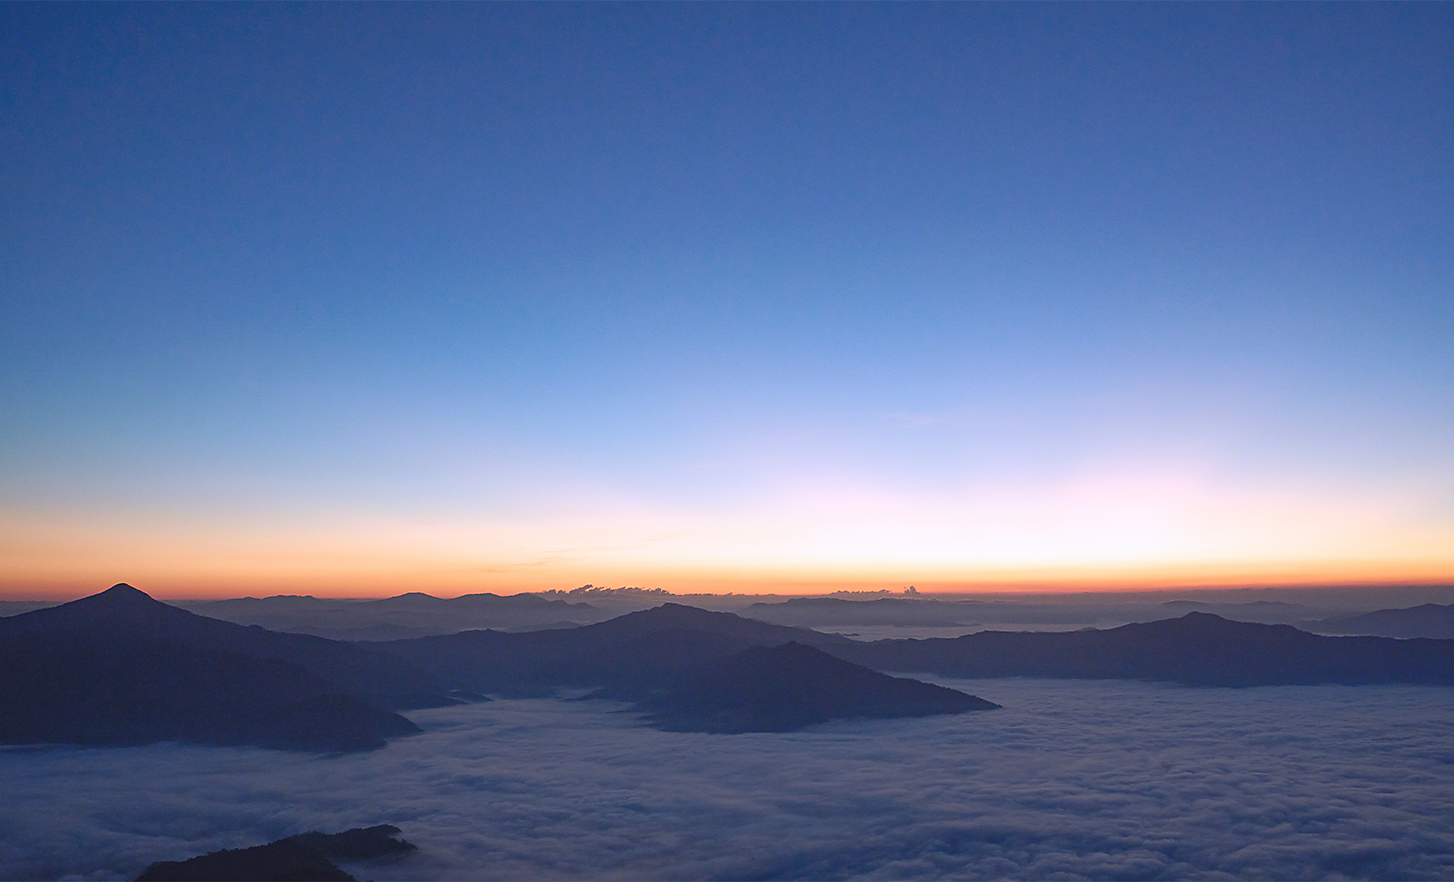 Spectacular view over distant mountains swathed in low cloud at daybreak